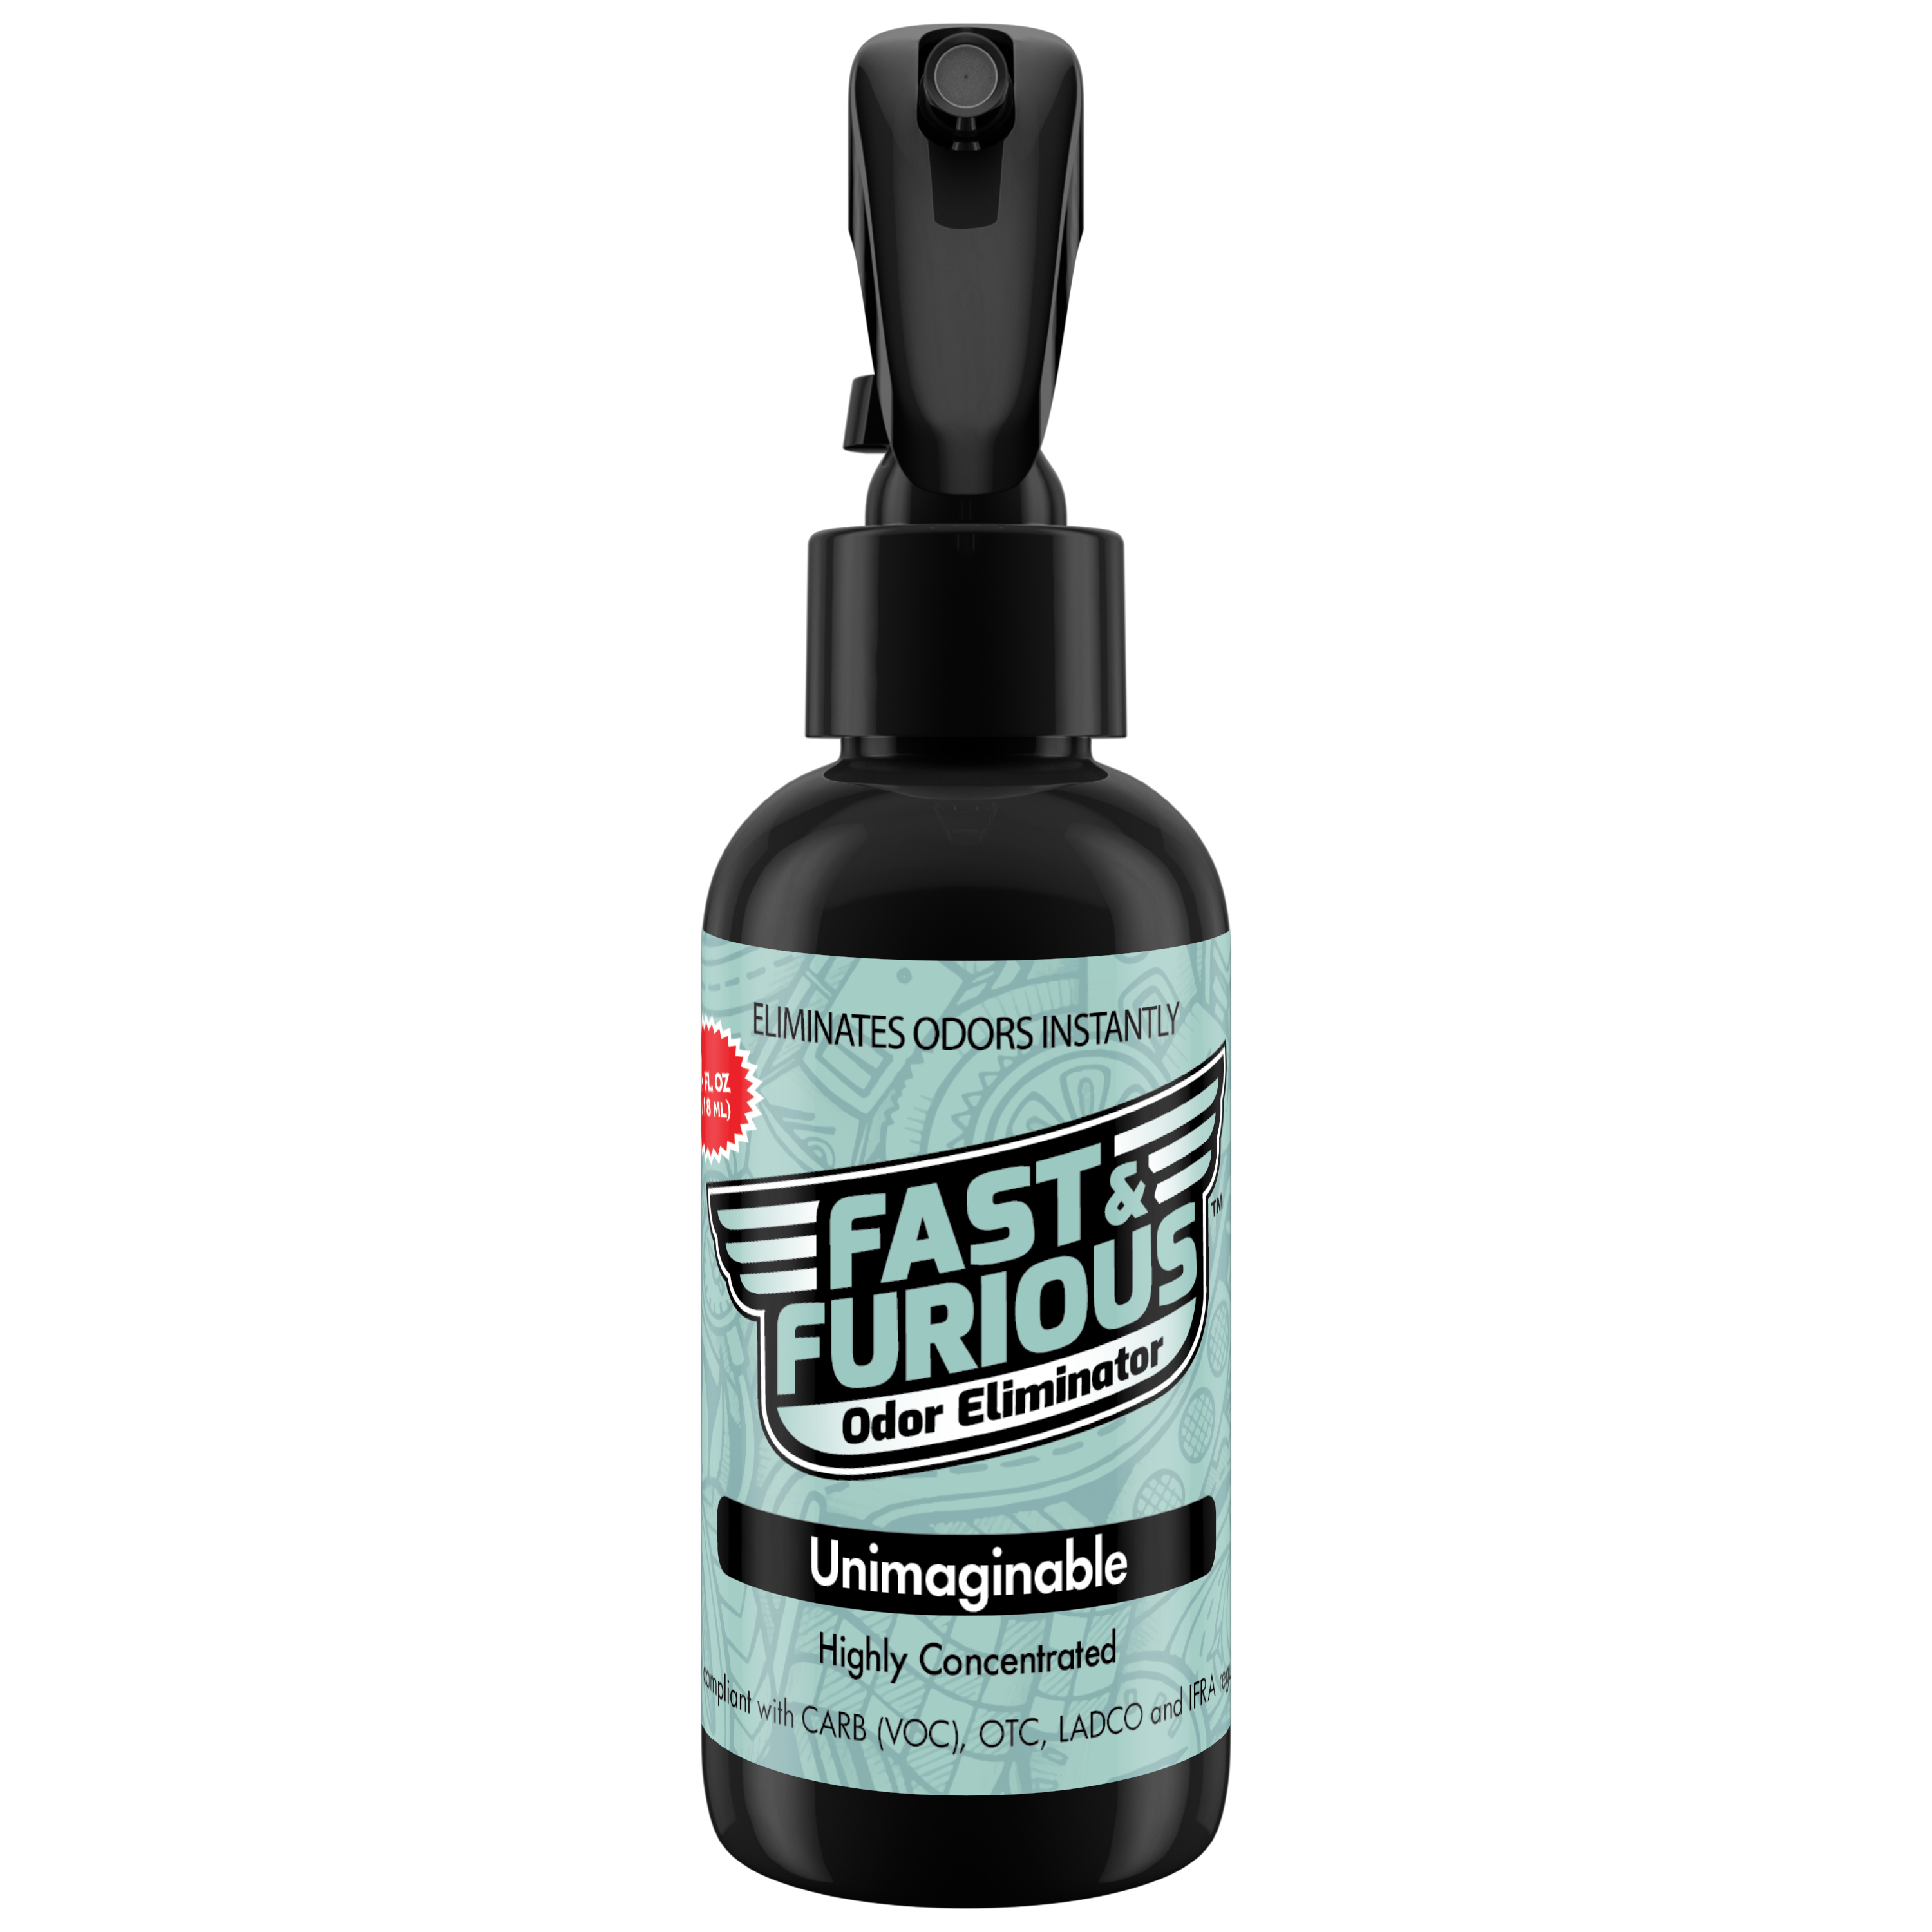 Fast and Furious Odor Eliminator - Unimaginable Scent